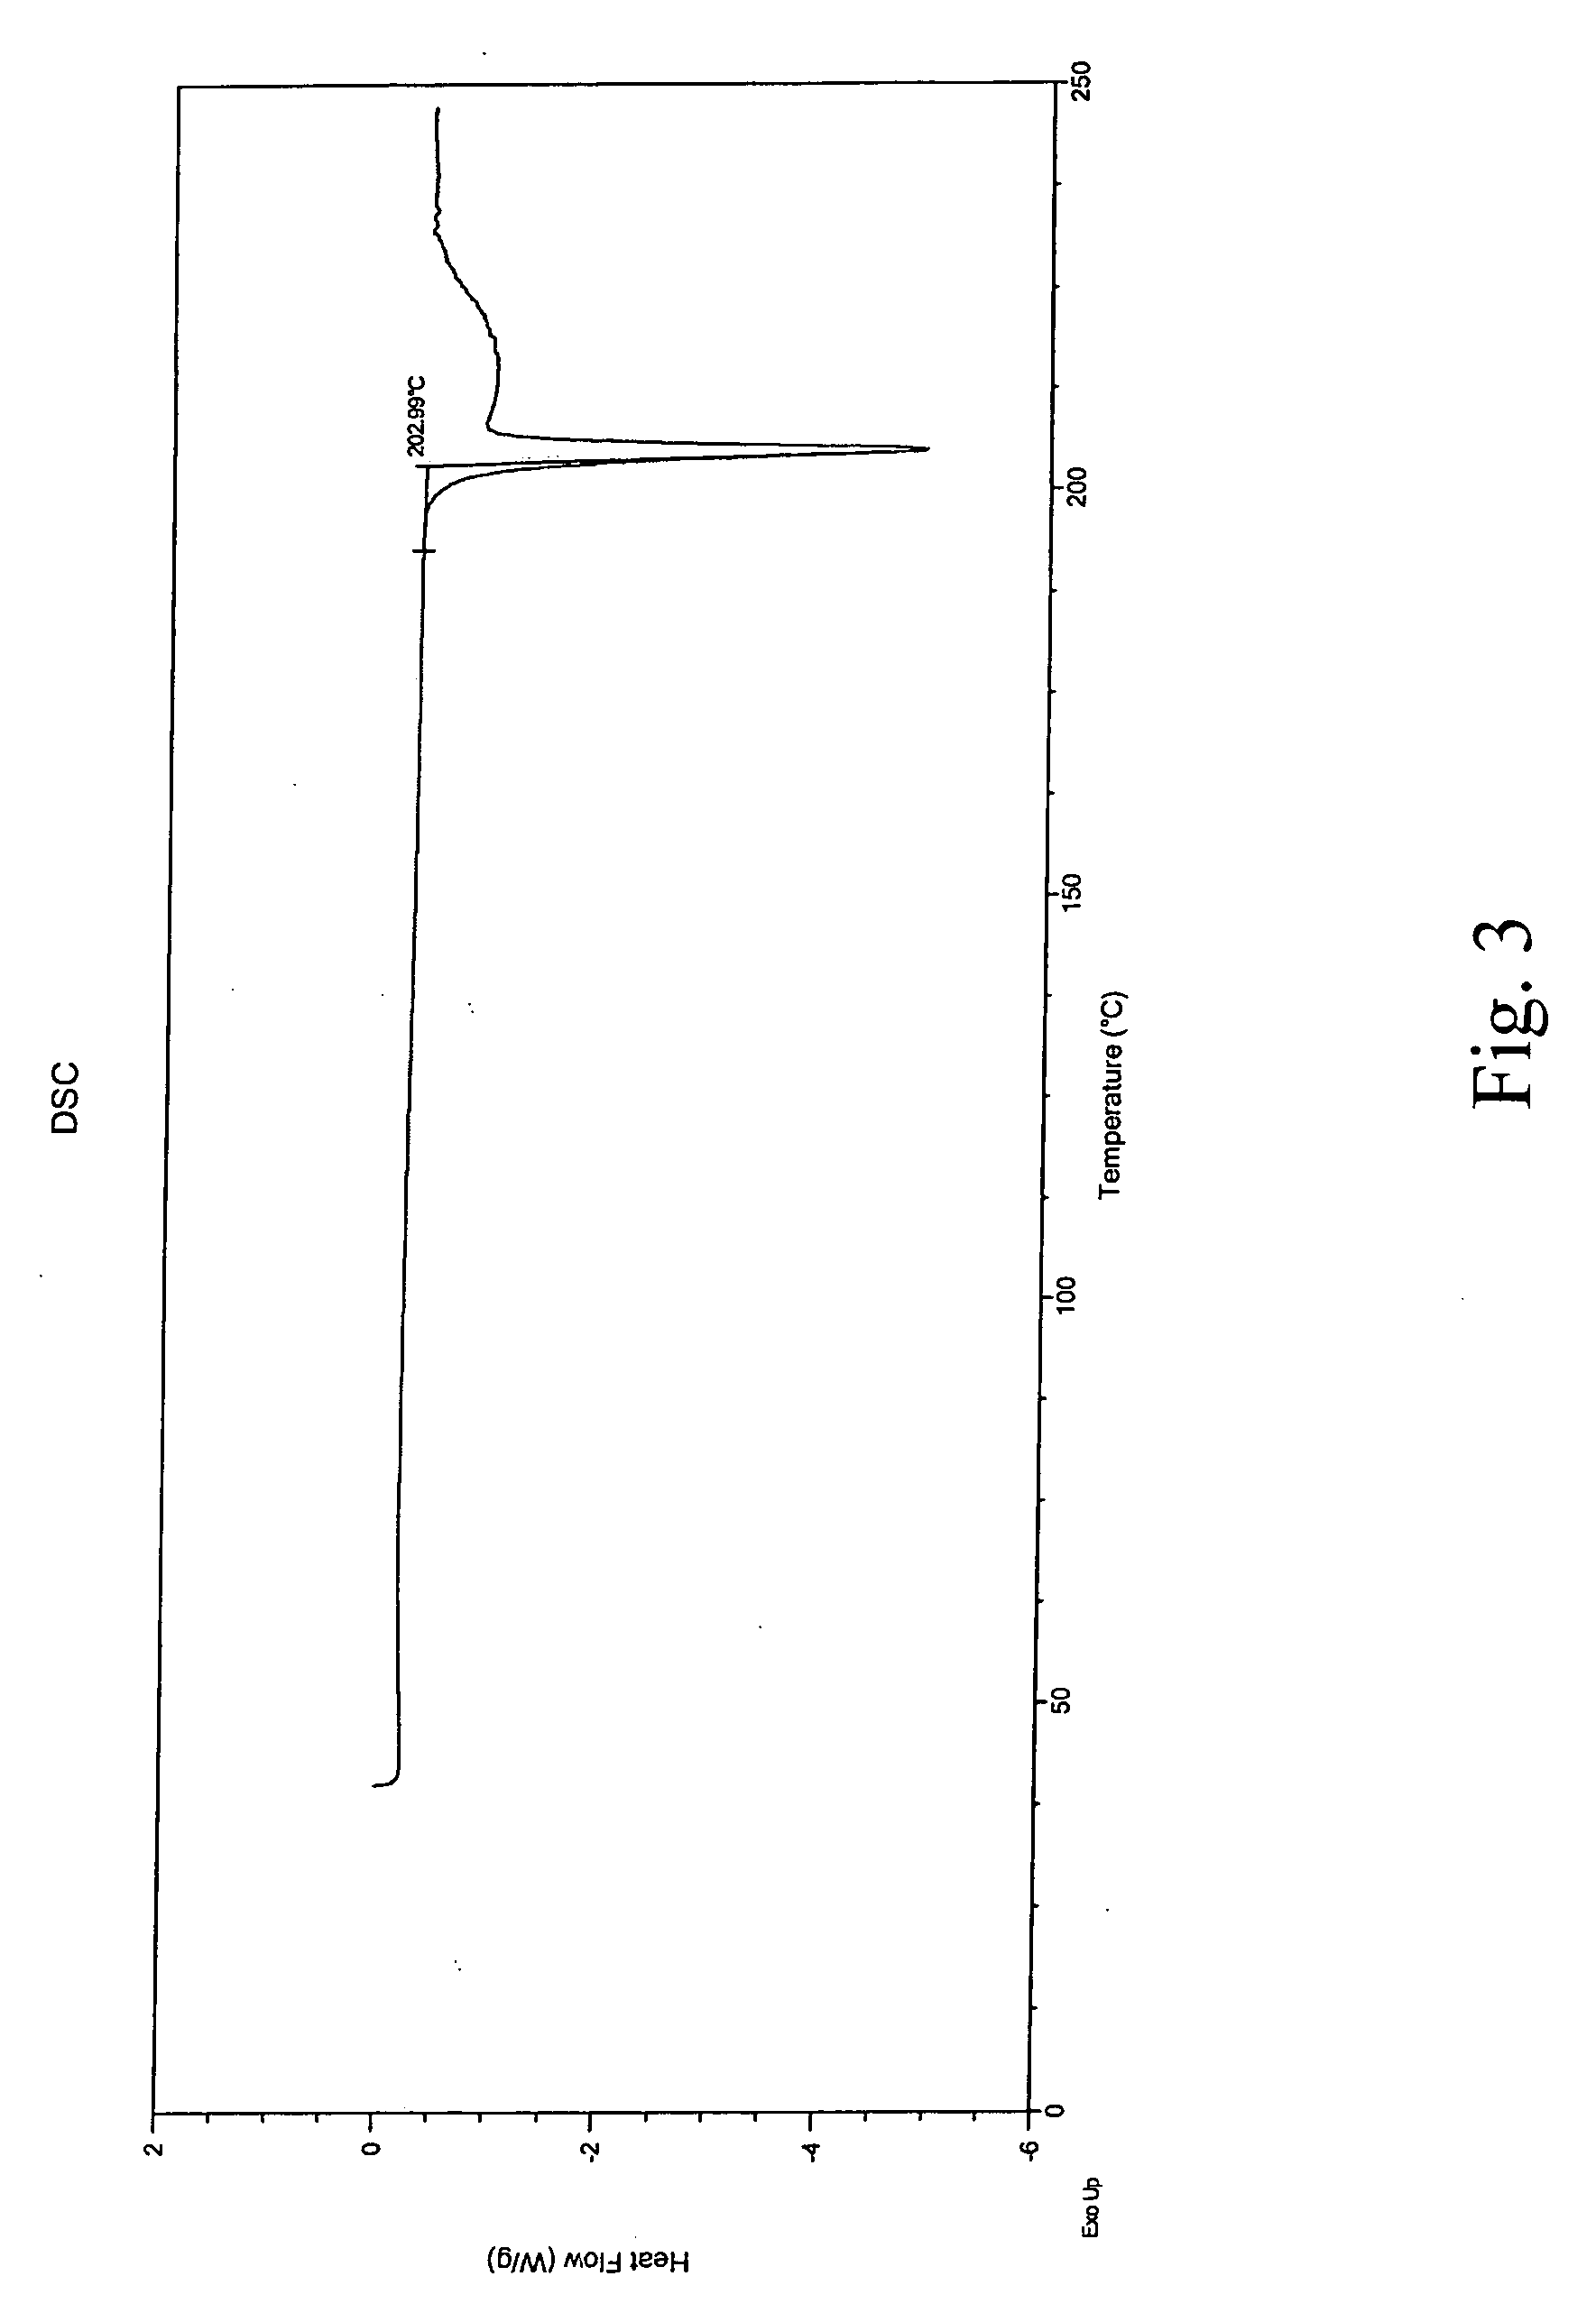 Crystalline aripiprazole salts and processes for preparation and purification thereof